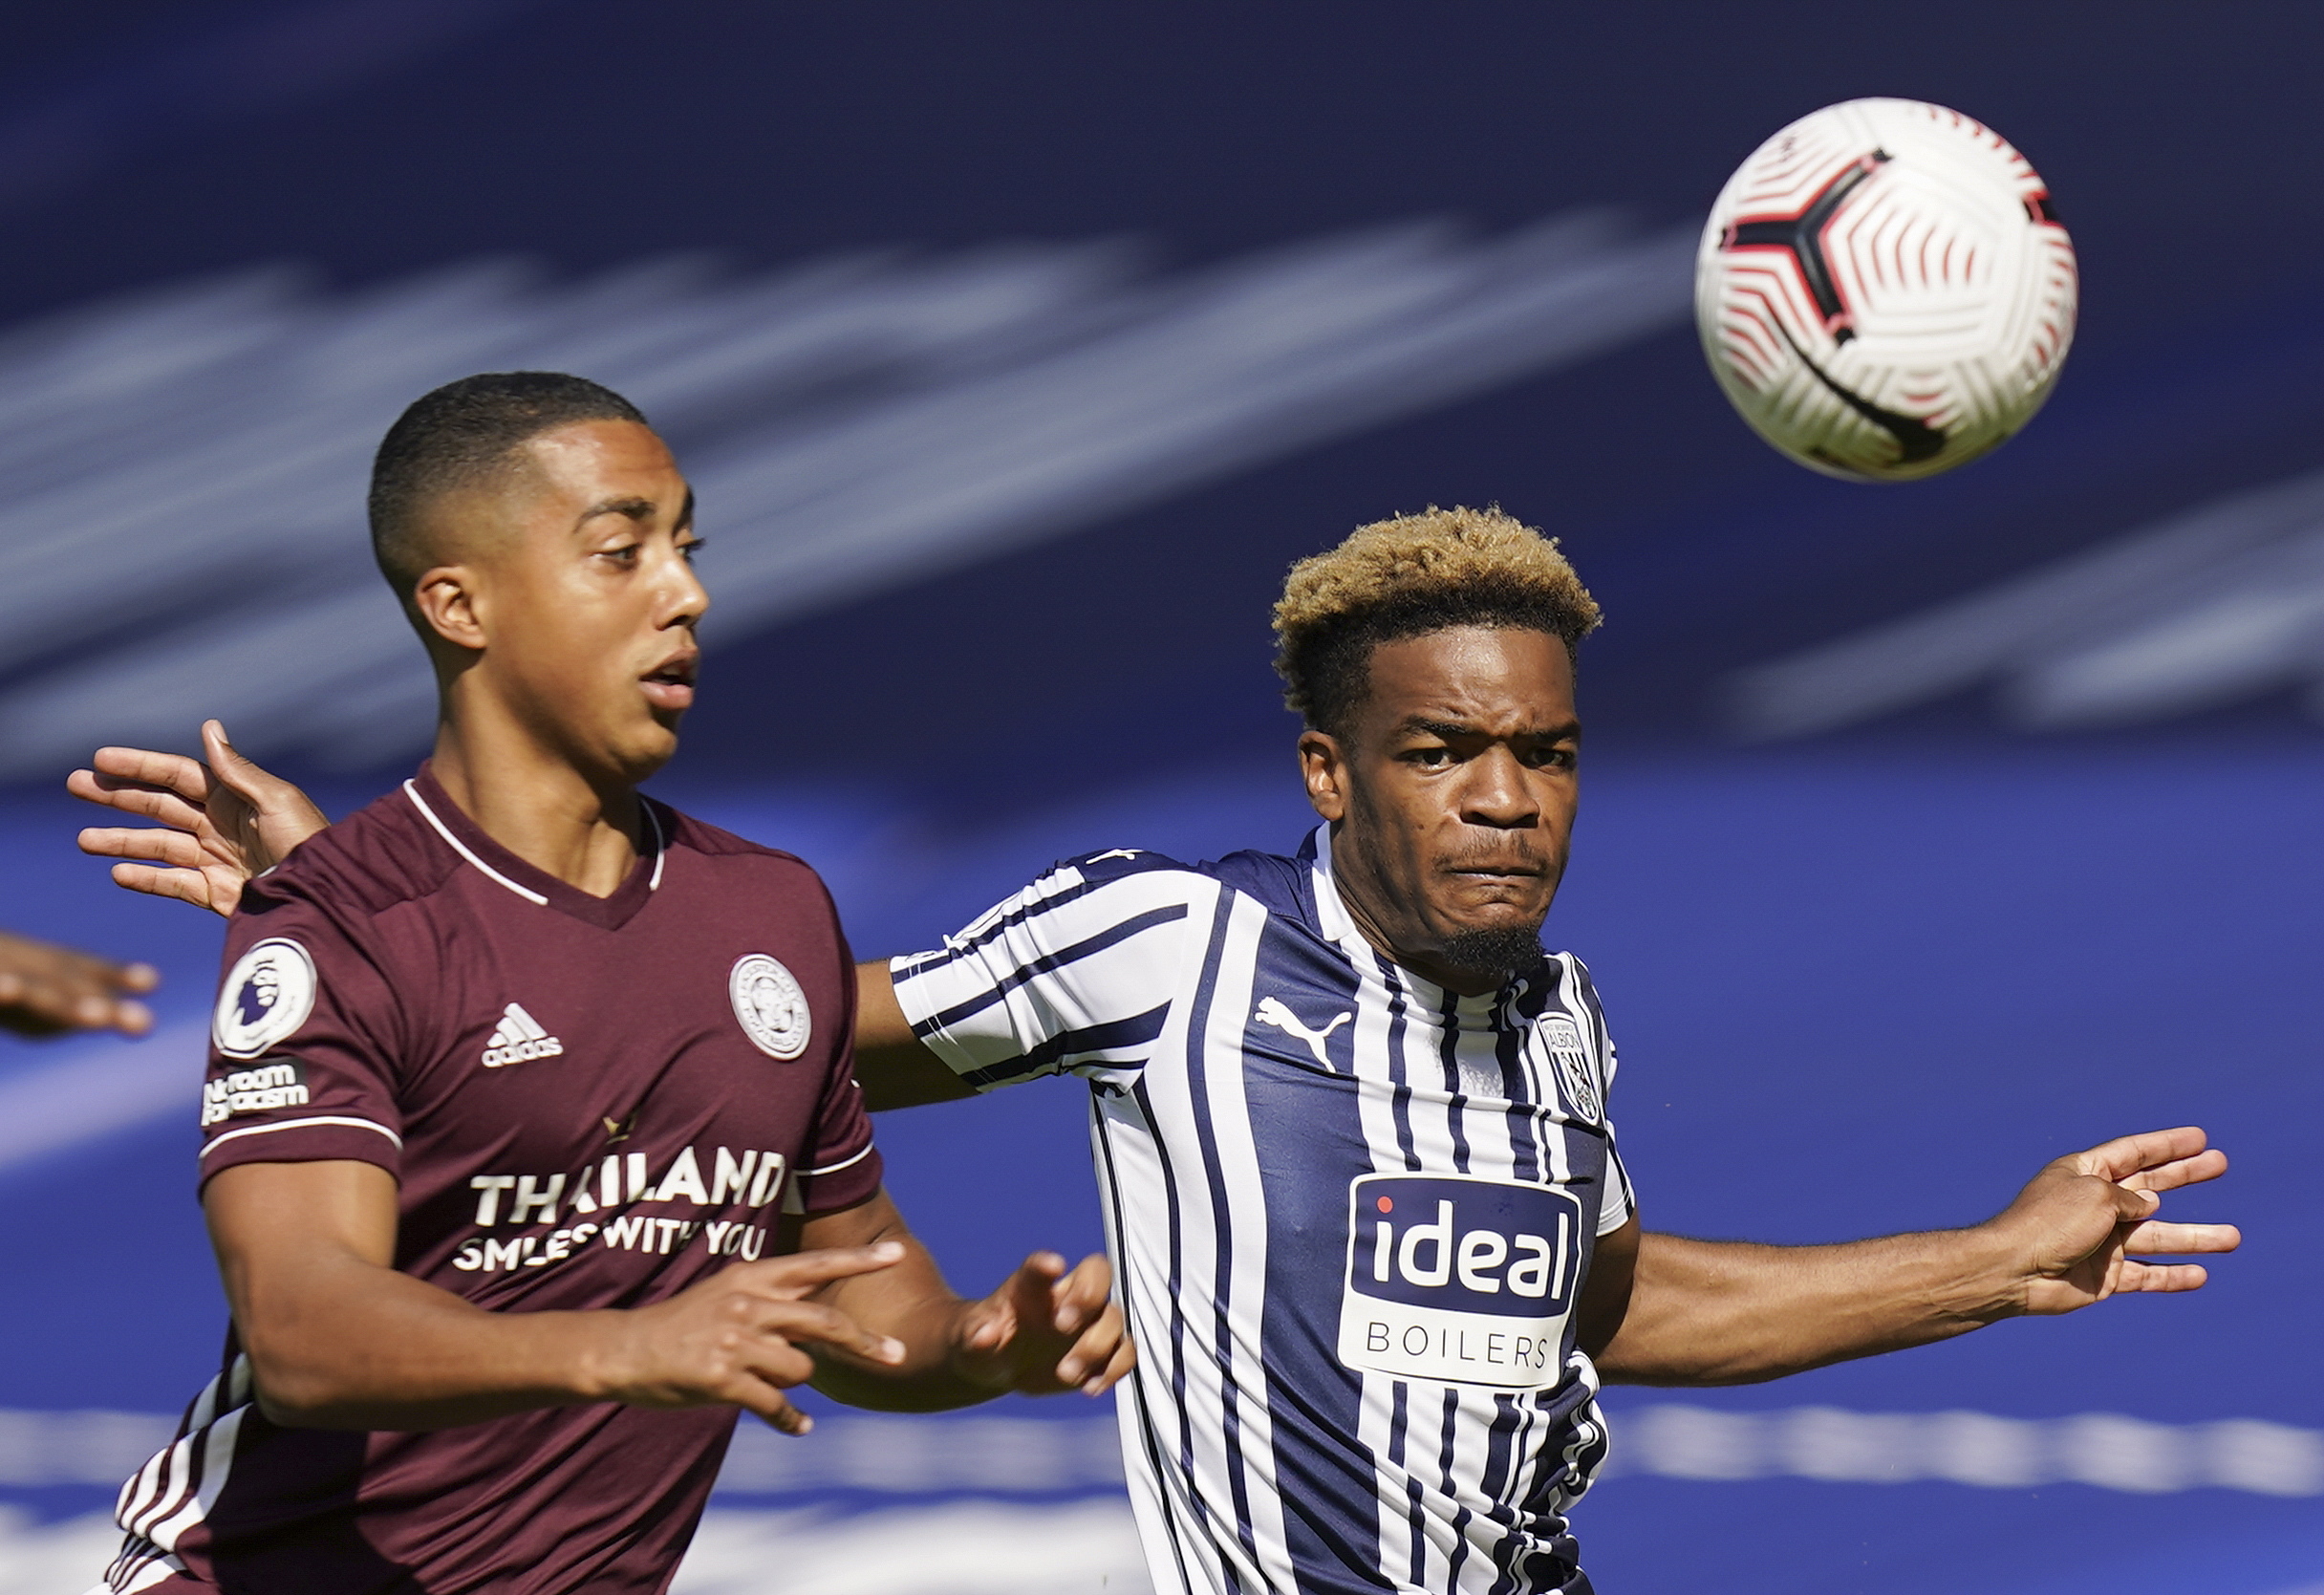 epa08666057 Leicester's Youri Tielemans (L) and West Bromwich Albion's Grady Diangana (R) in action during the English Premier League soccer match between West Bromwich Albion and Leicester City in West Bromwich, Britain, 13 September 2020.  EPA/Tim Keeton / Pool EDITORIAL USE ONLY. No use with unauthorized audio, video, data, fixture lists, club/league logos or 'live' services. Online in-match use limited to 120 images, no video emulation. No use in betting, games or single club/league/player publications.